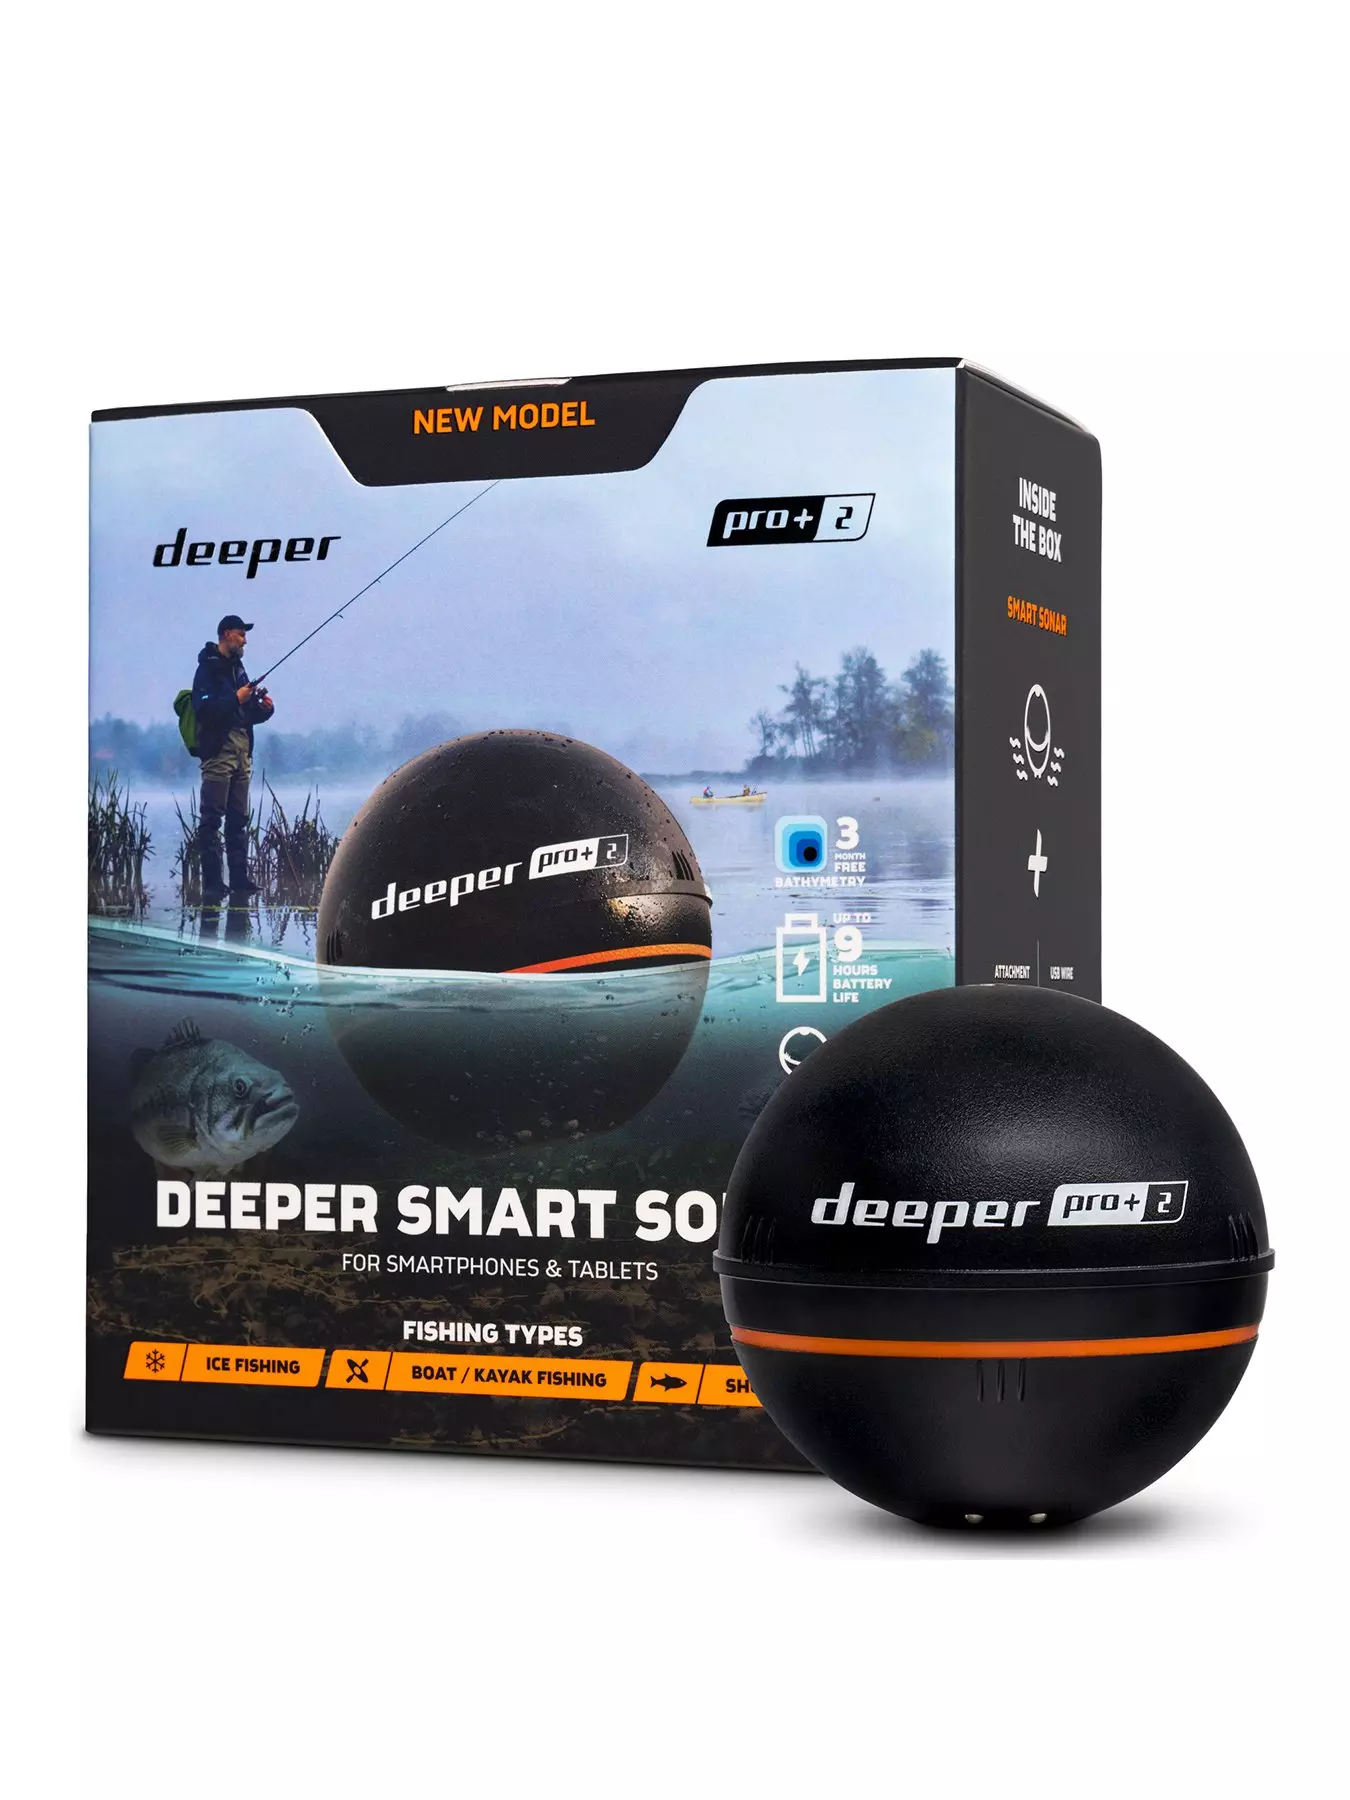 Deeper Chirp+ 2 Wireless Smart Sonar Castable and Portable WiFi